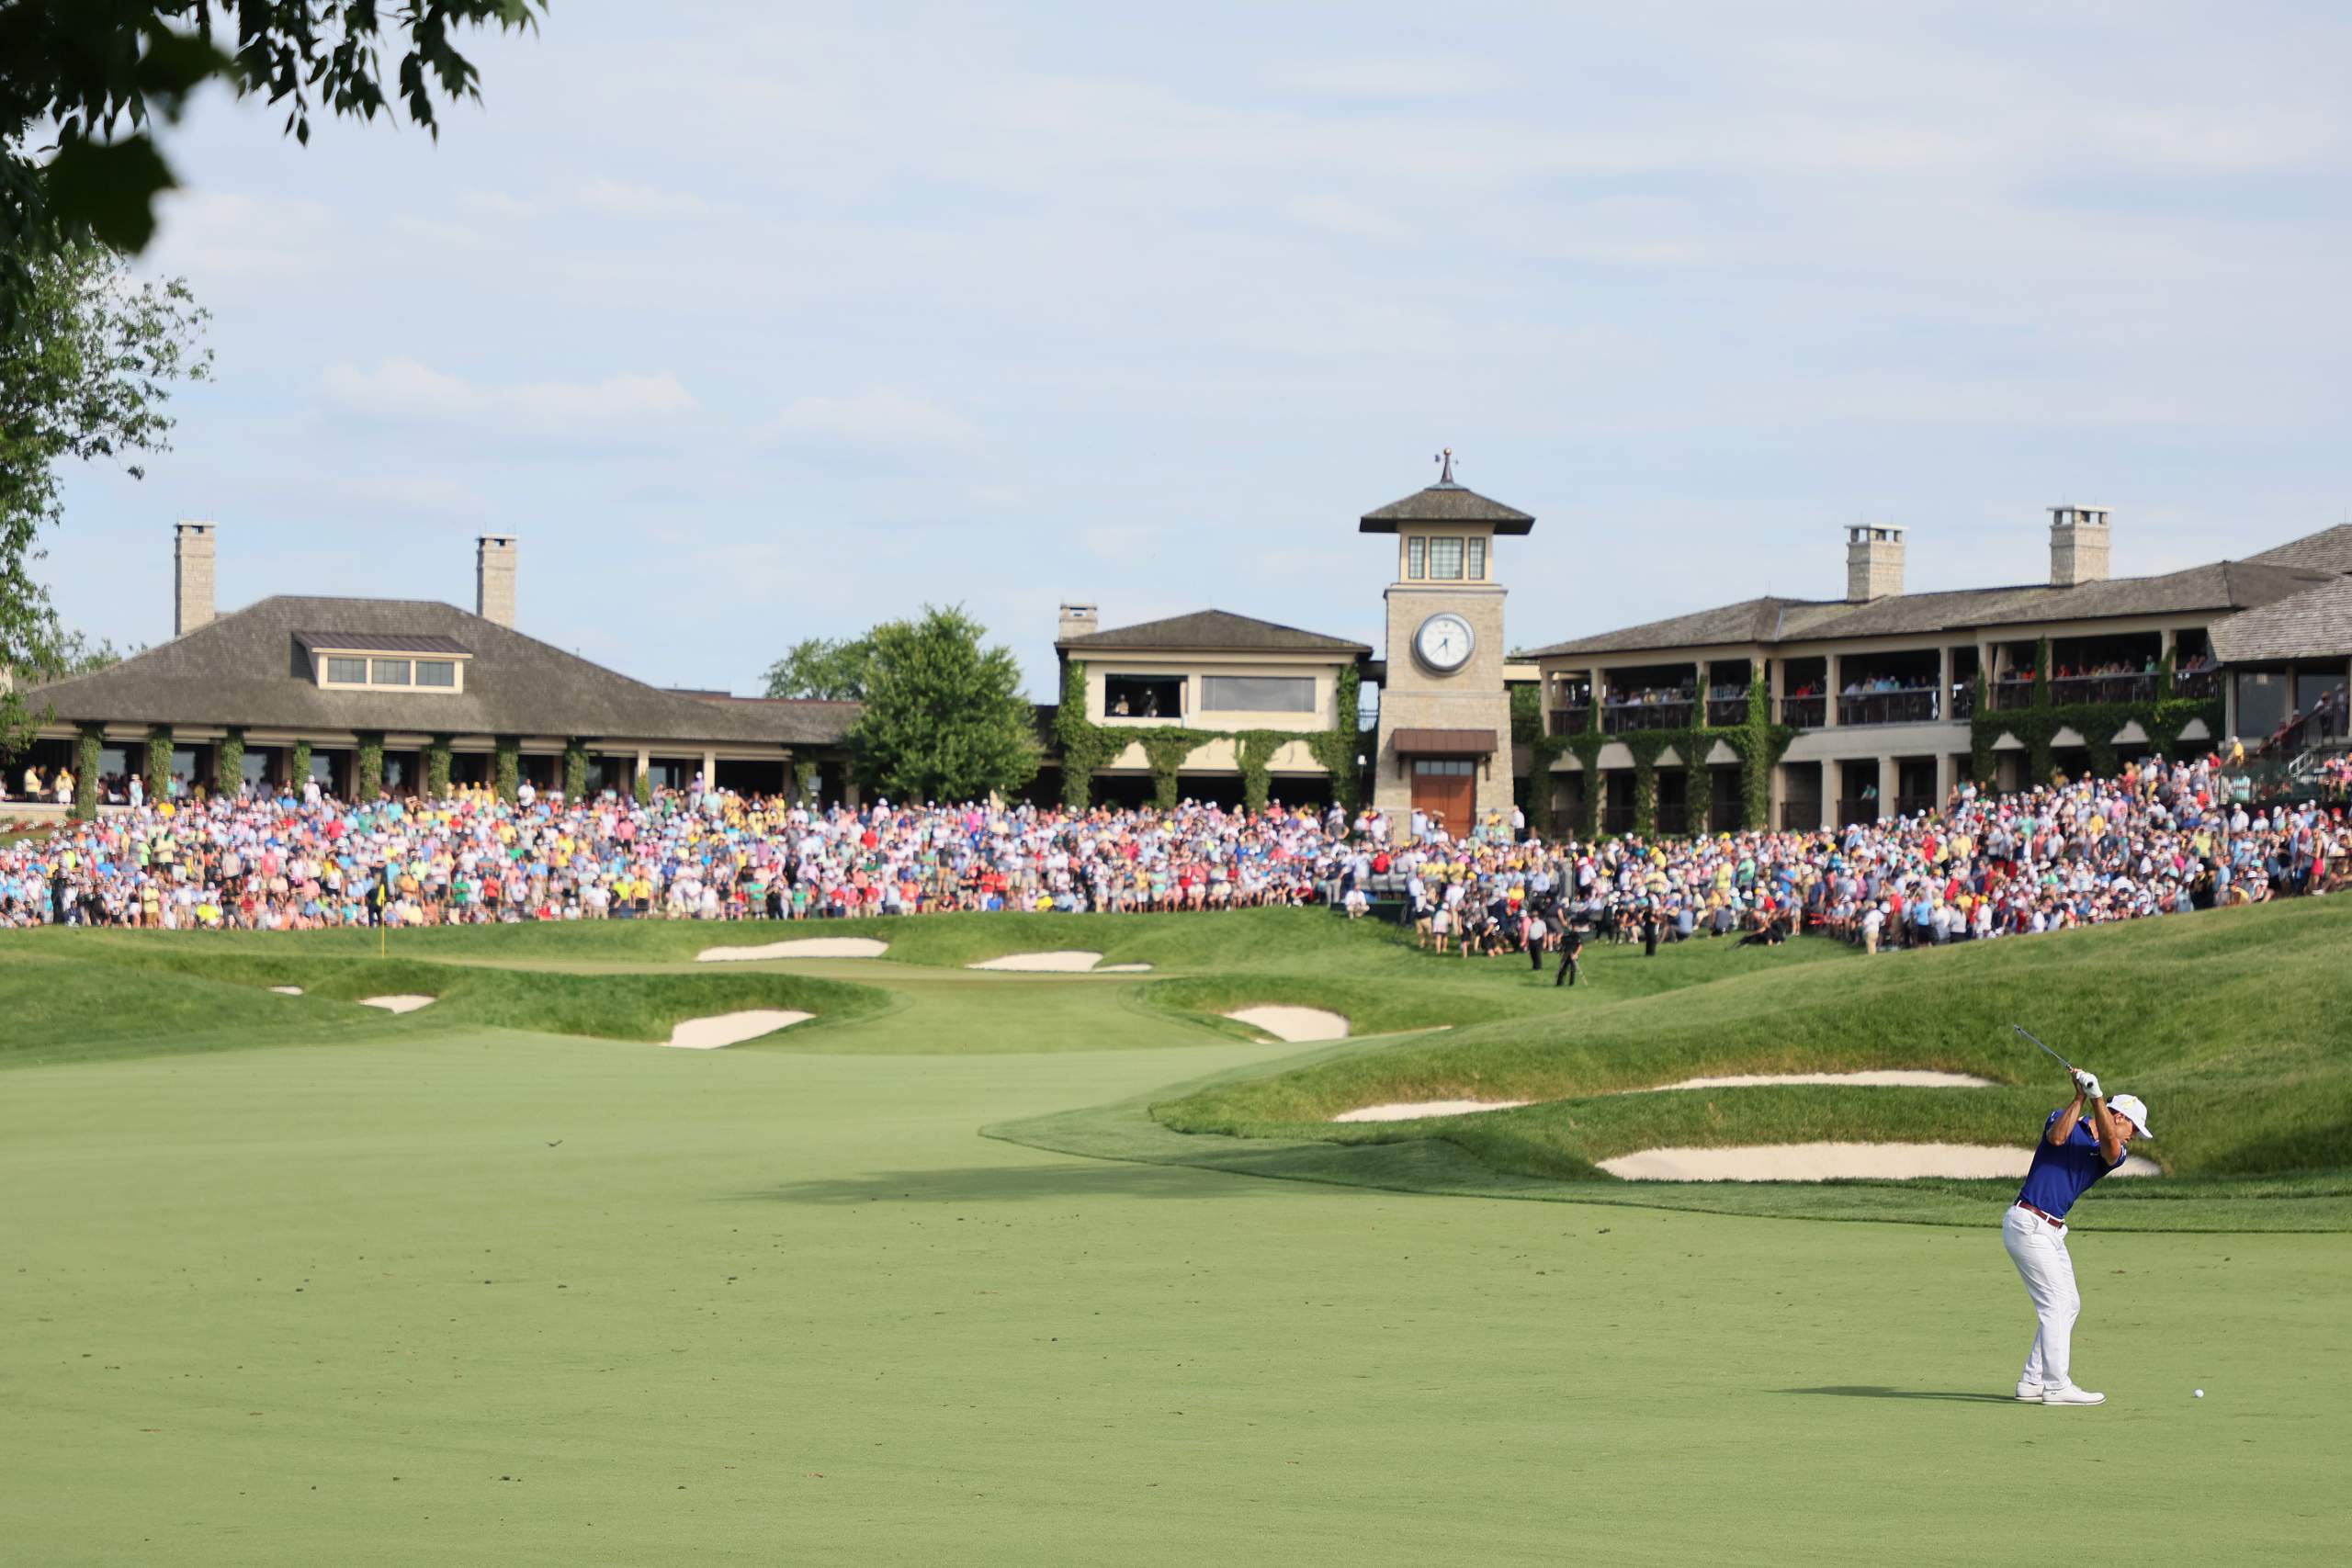 <em><b>Course Location: Dublin, Ohio</b></em> Crafted by golf legend Jack Nicklaus, Muirfield Village pays homage to Scotland's historic Muirfield, where Nicklaus clinched the first of his three British Open titles in 1966, marking the inception of his illustrious career in grand slams. Nestled within this prestigious enclave lie two distinct courses: The Country Club at Muirfield and the renowned Muirfield Village Golf Club, home to the esteemed Memorial Tournament. Over the years, Muirfield Village has hosted a plethora of esteemed events, from national championships to international team competitions (1987 Ryder Cup, 2013 Presidents Cup), cementing its status as a premier golfing destination. Under Nicklaus's meticulous stewardship, the course has continually evolved, with strategic modifications to accommodate technological advancements and enhance the playing experience.